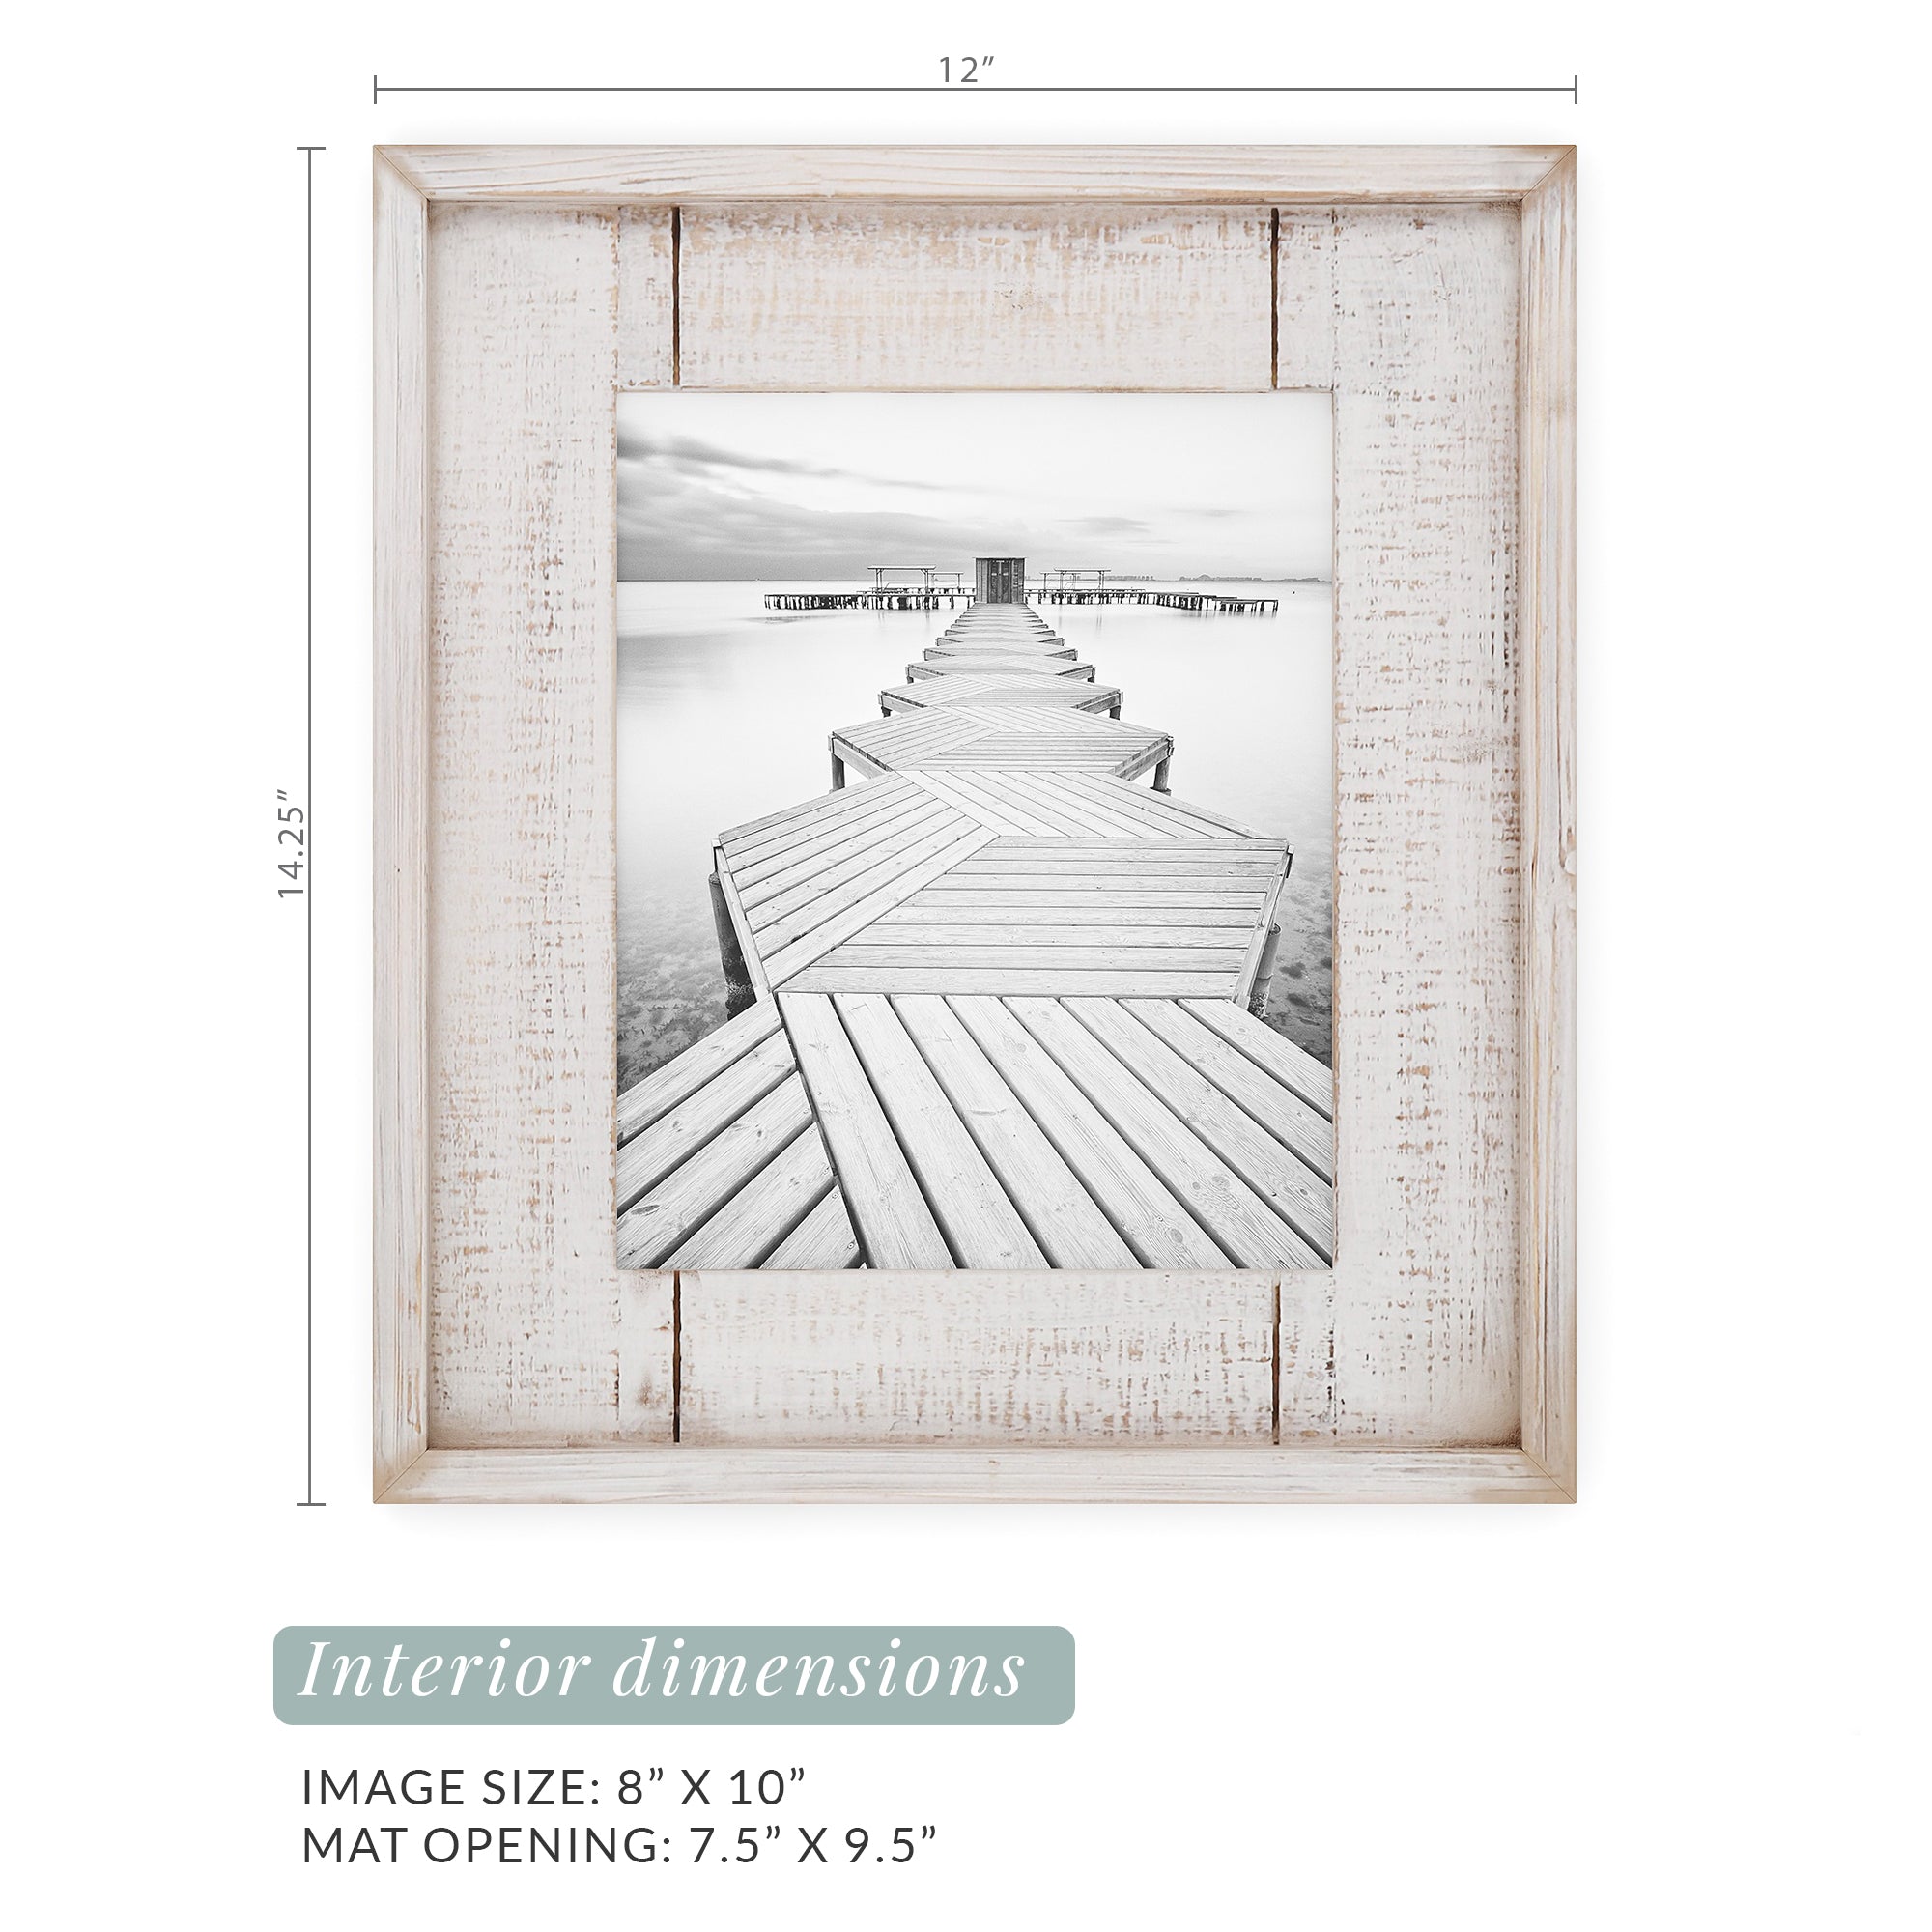 Beach & Coastal Theme White Reclaimed Wood Picture Frames for 4x6 or 5x7  Pictures